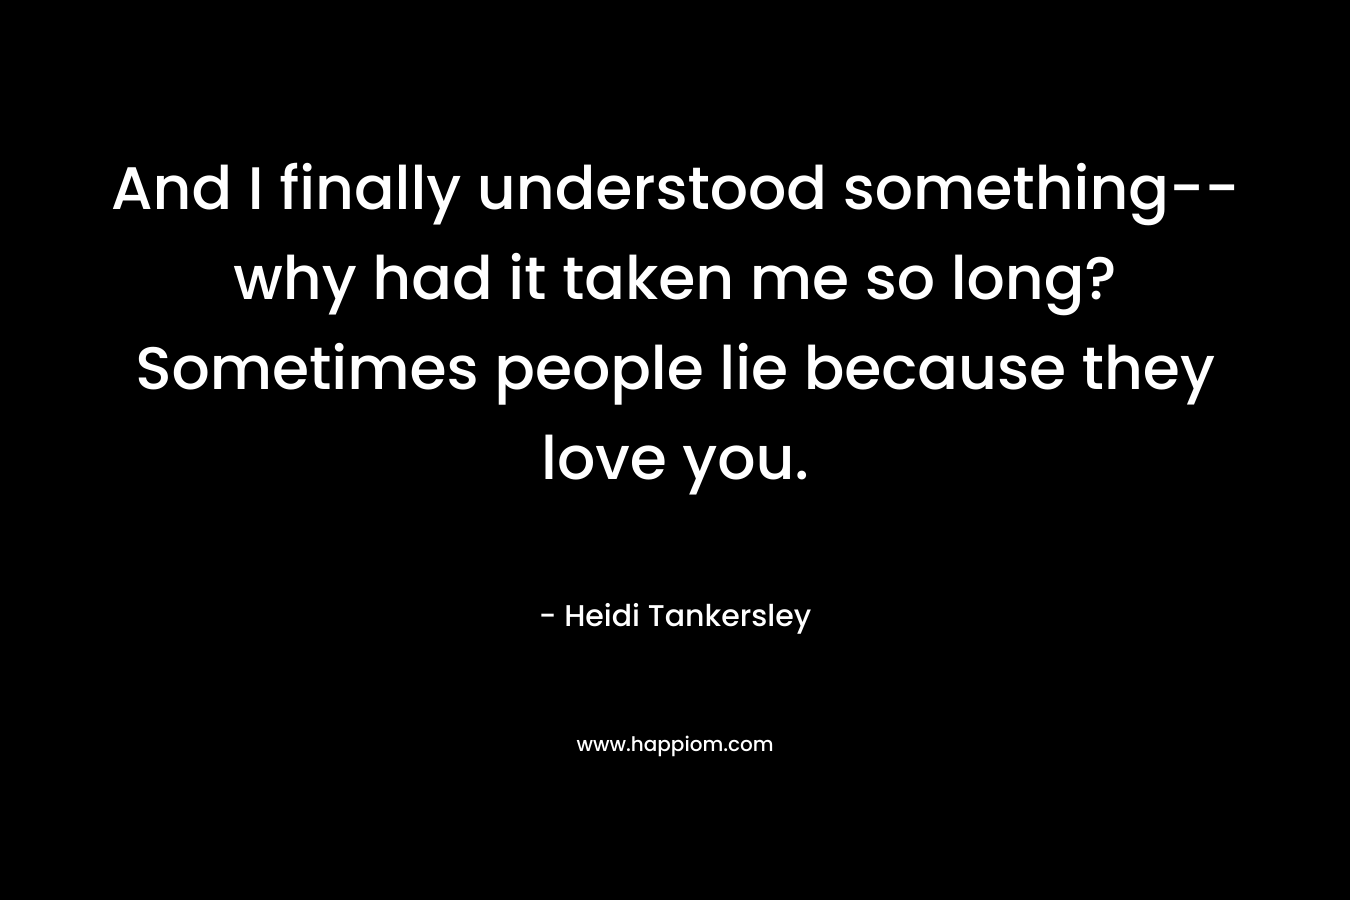 And I finally understood something–why had it taken me so long? Sometimes people lie because they love you. – Heidi Tankersley